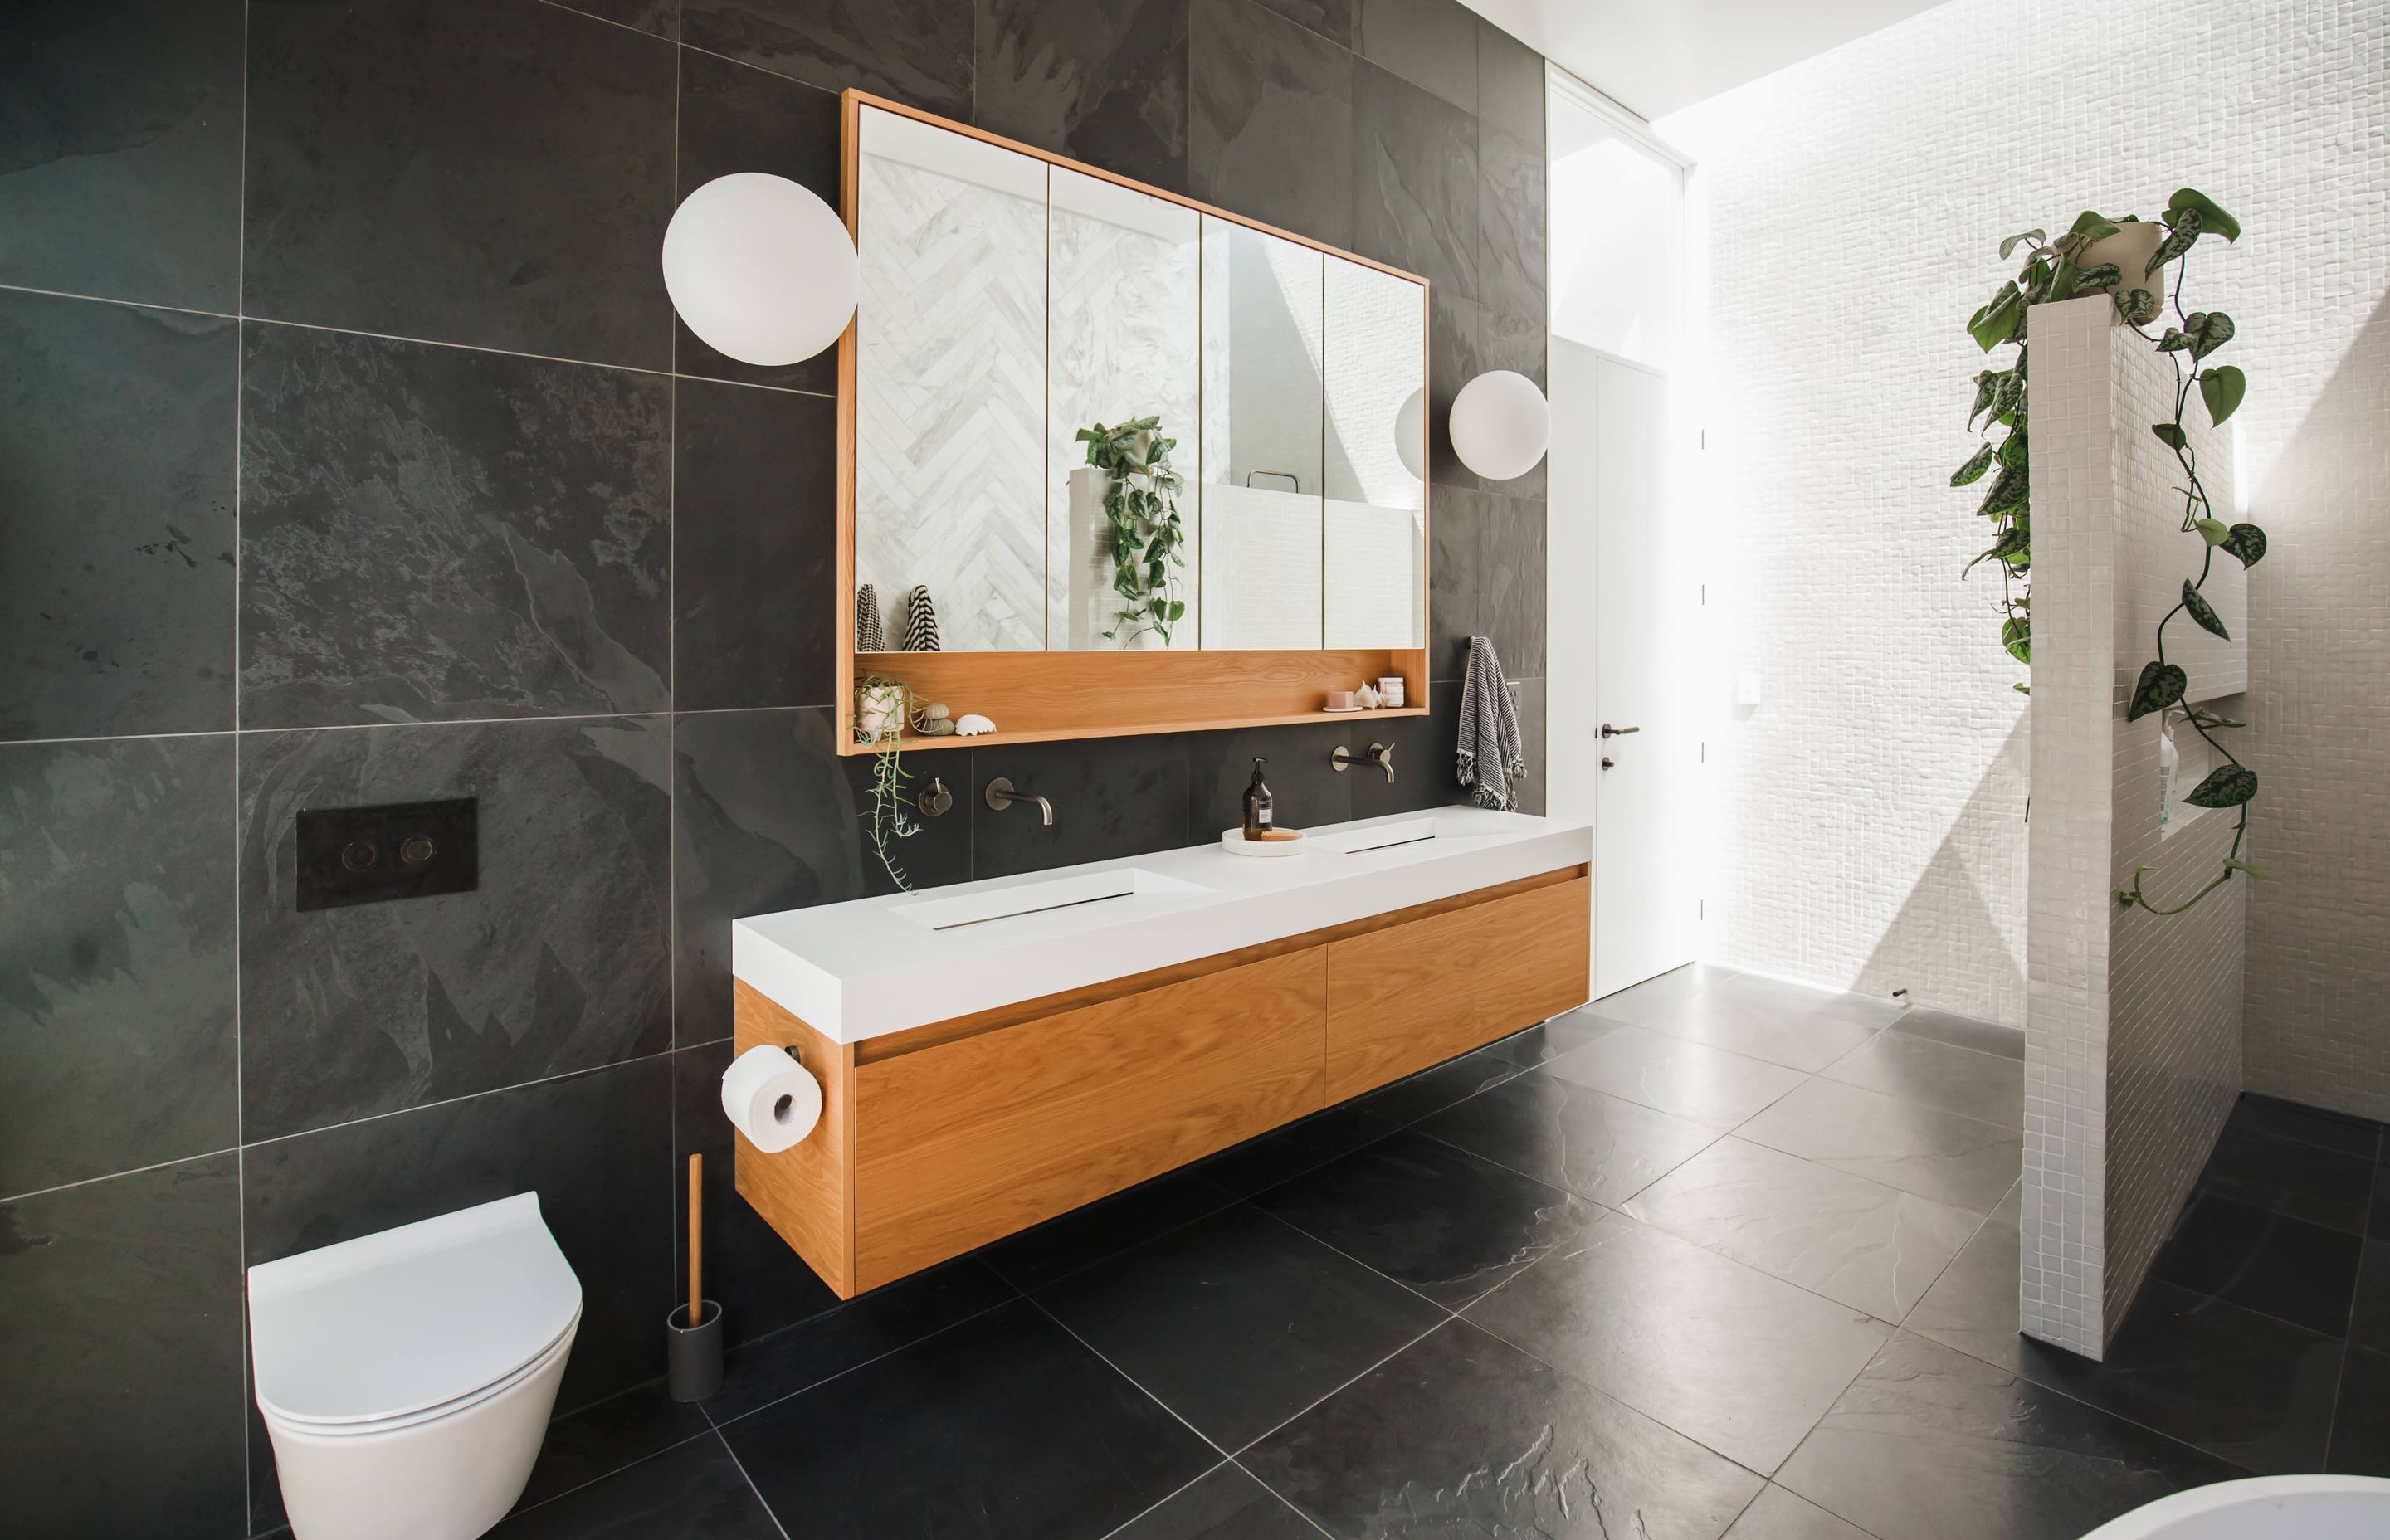 The main bathroom features a combination of slate, hone marble, and glass mosaic tiles.